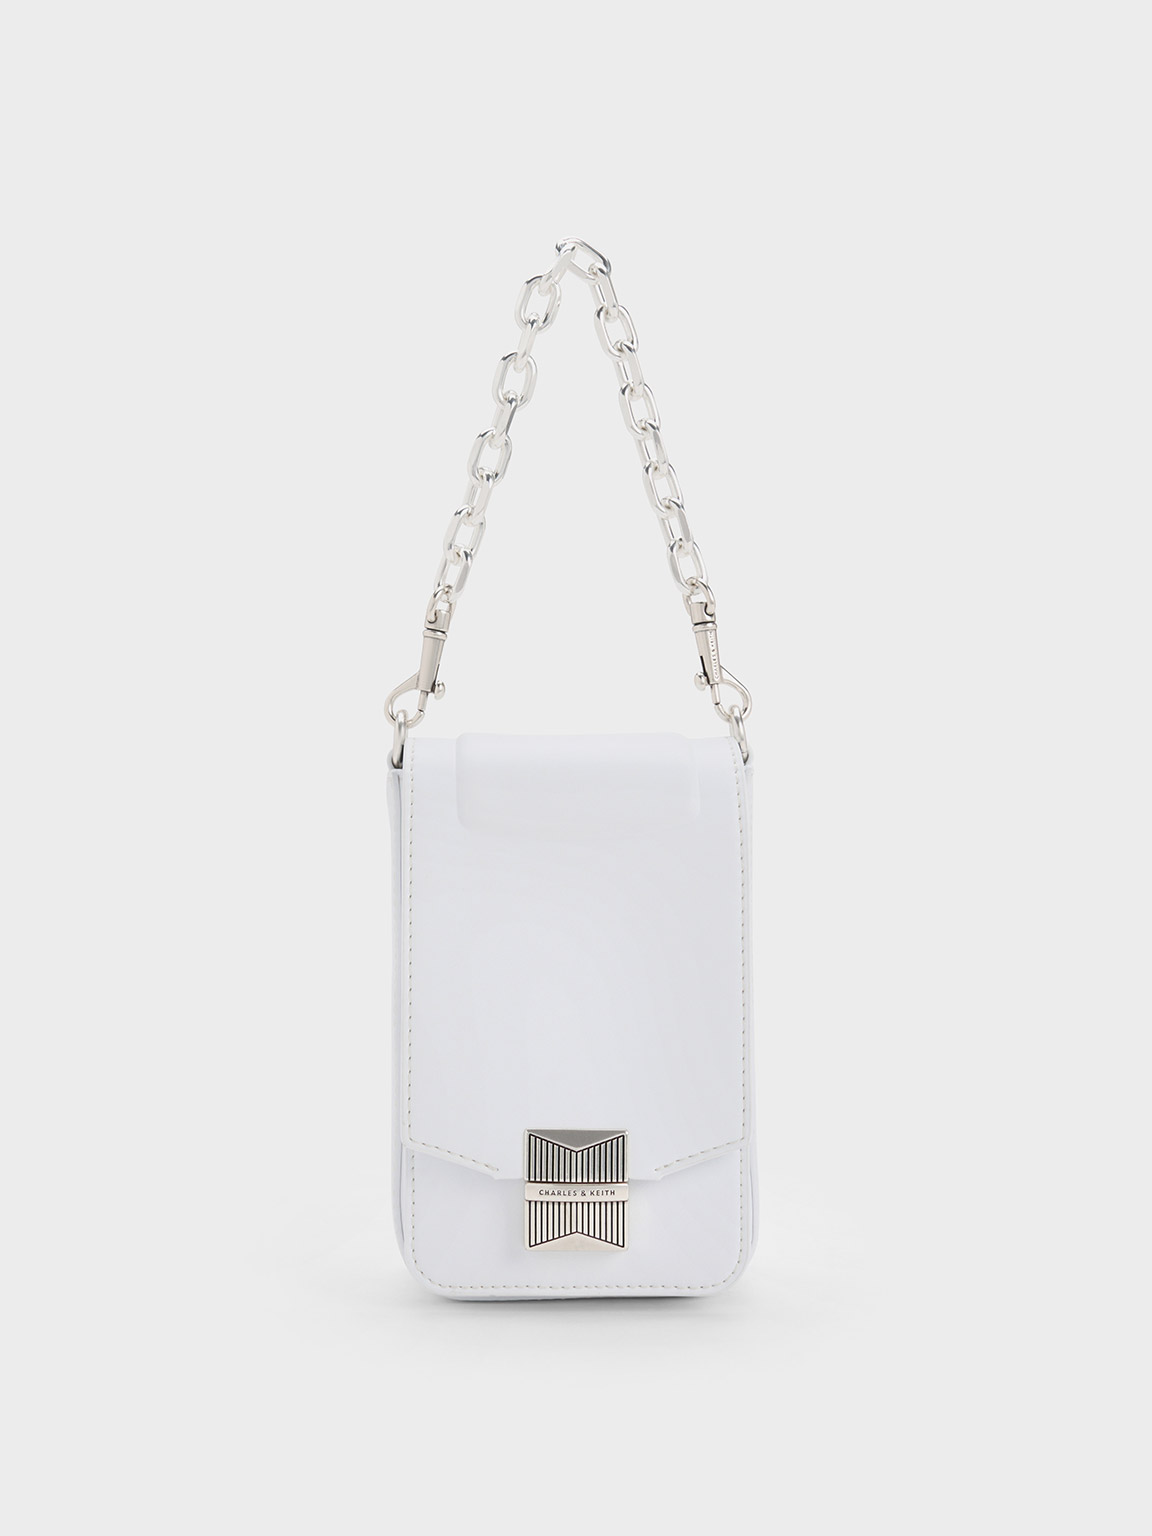 Charles & Keith Kalinda Metallic Accent Phone Pouch In White